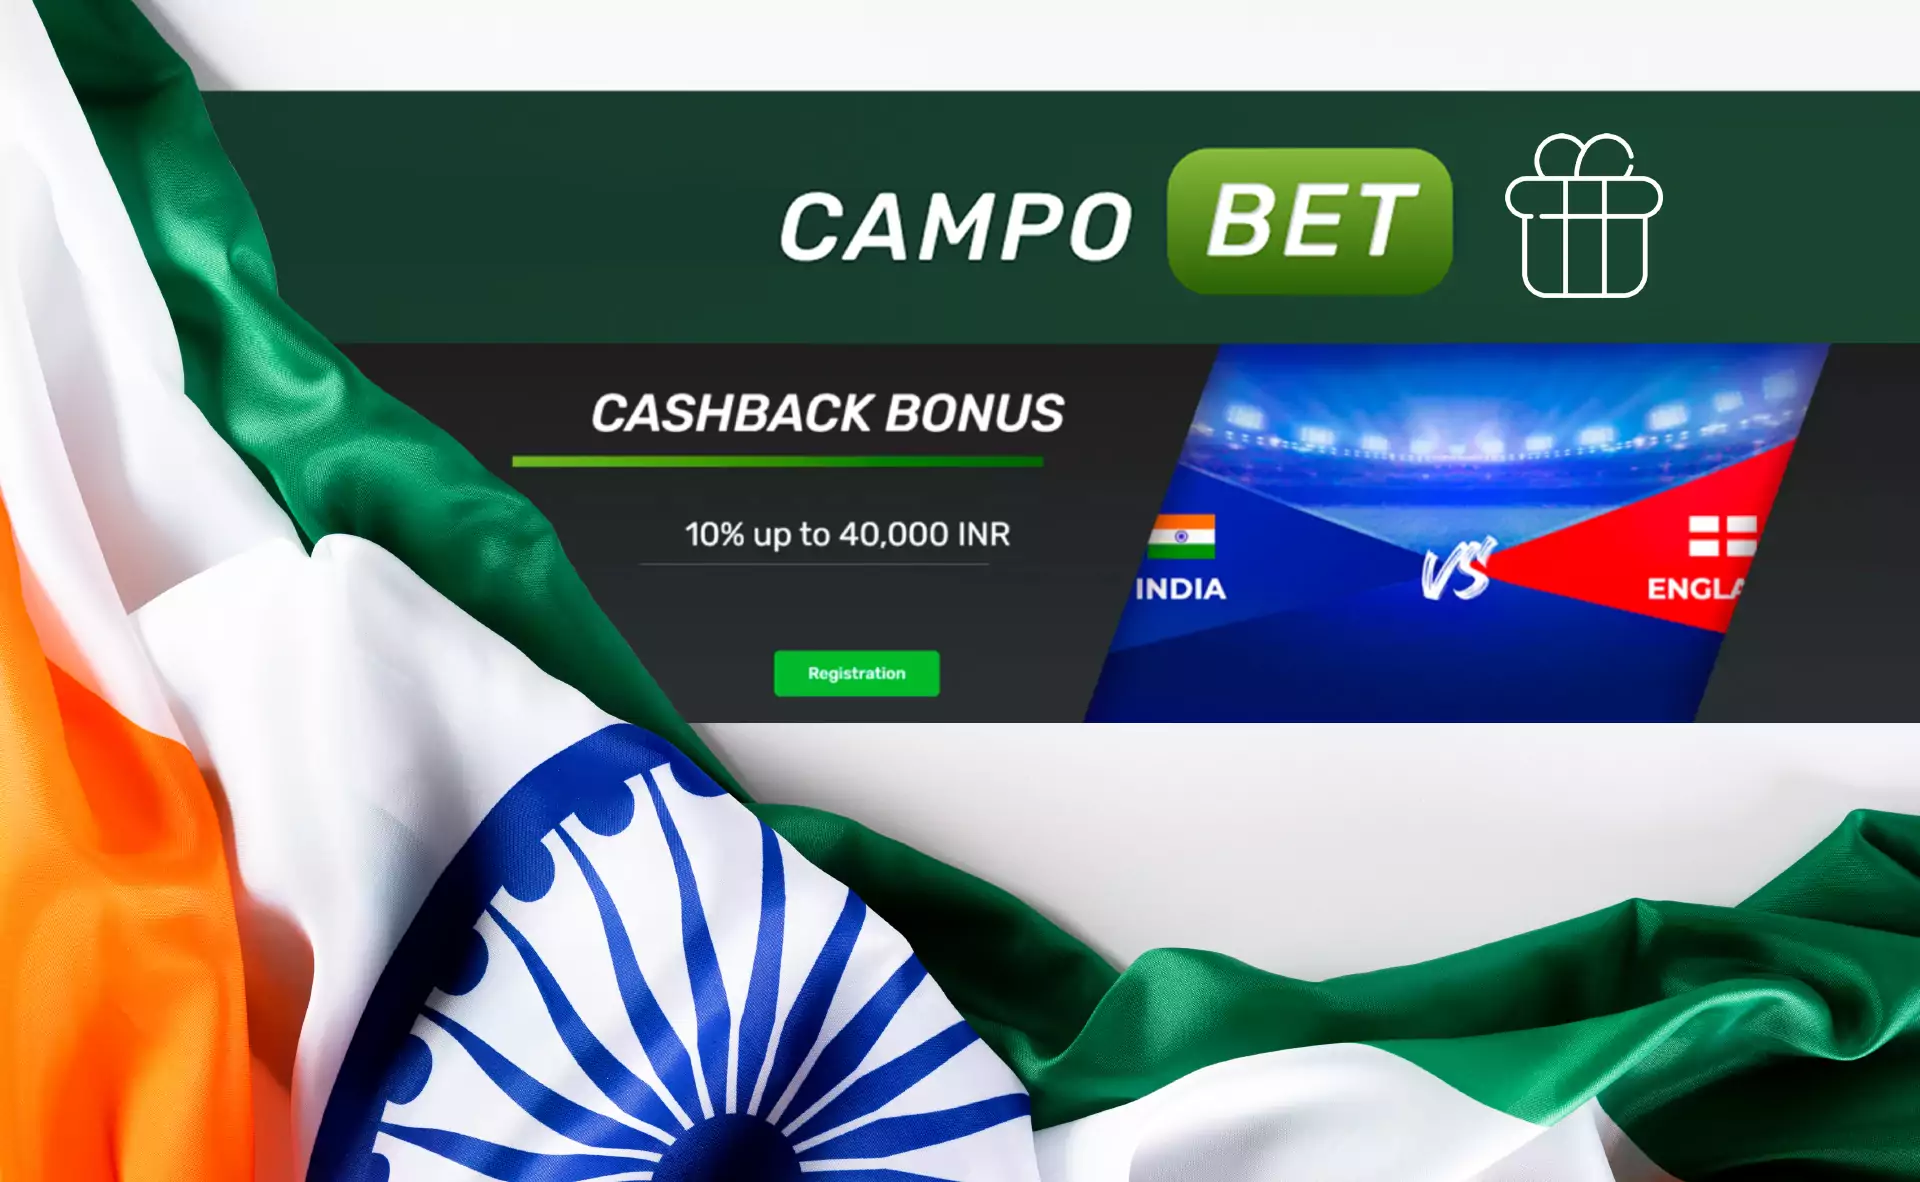 If you lose the bet, you still can get the cashback of up to 40000 INR.